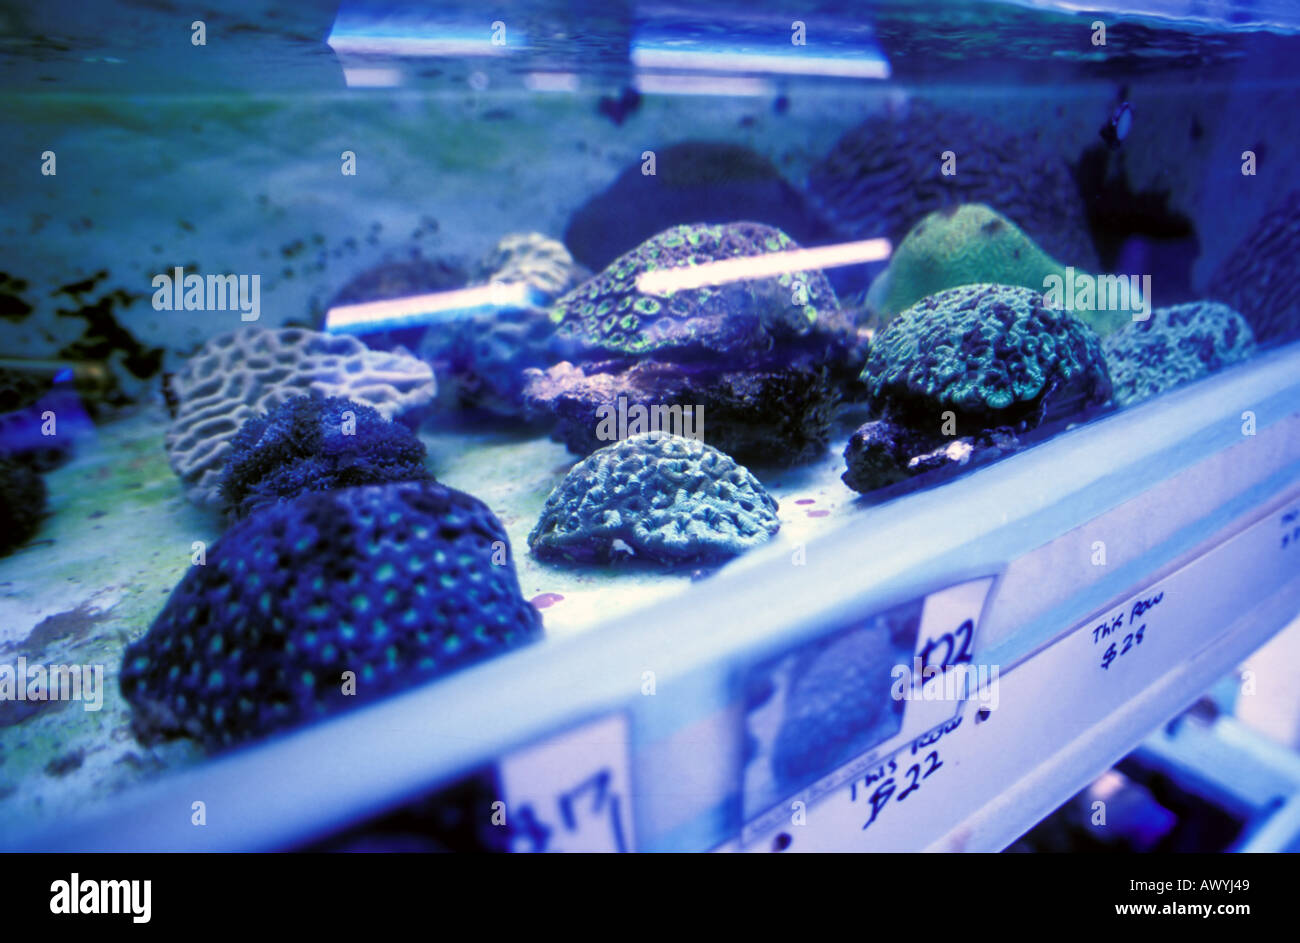 Hermatypic coral species such as mussids being successfully artificially propogated under UV lights Queensland Australia Stock Photo